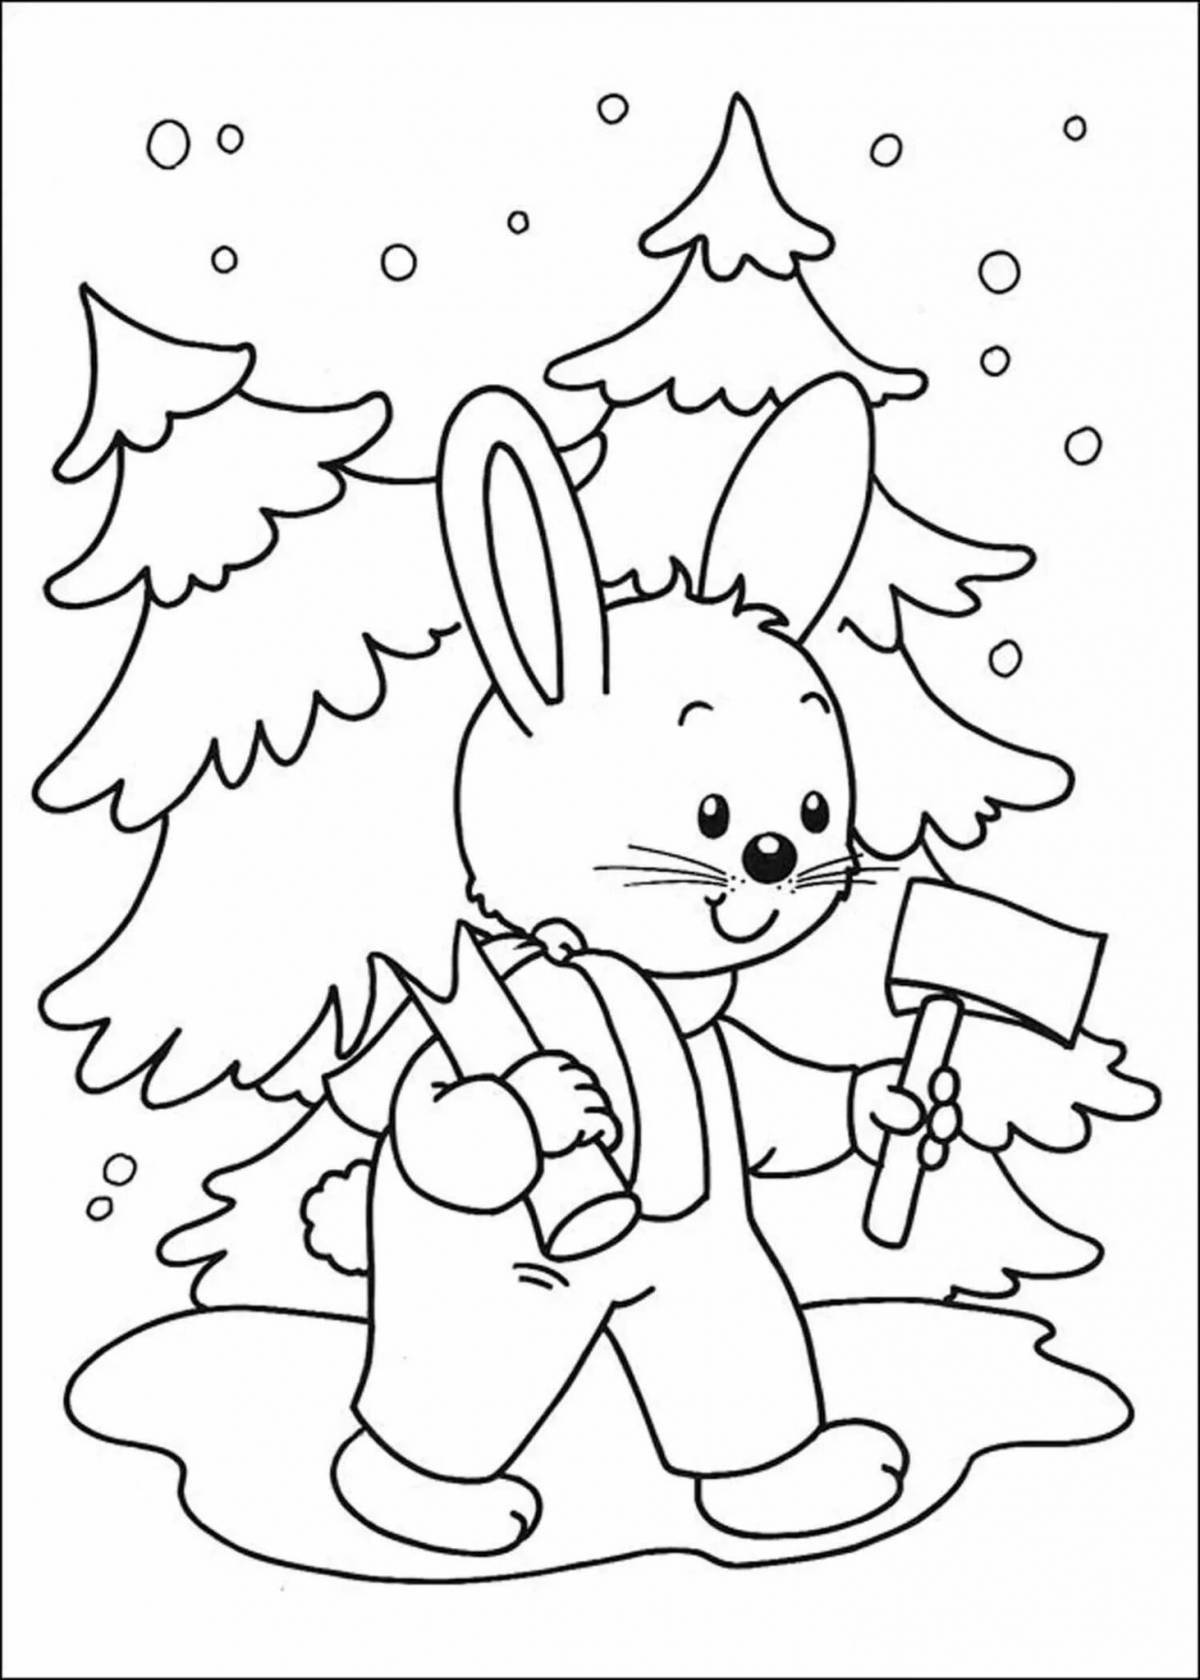 Colorful and picturesque Christmas coloring book for children